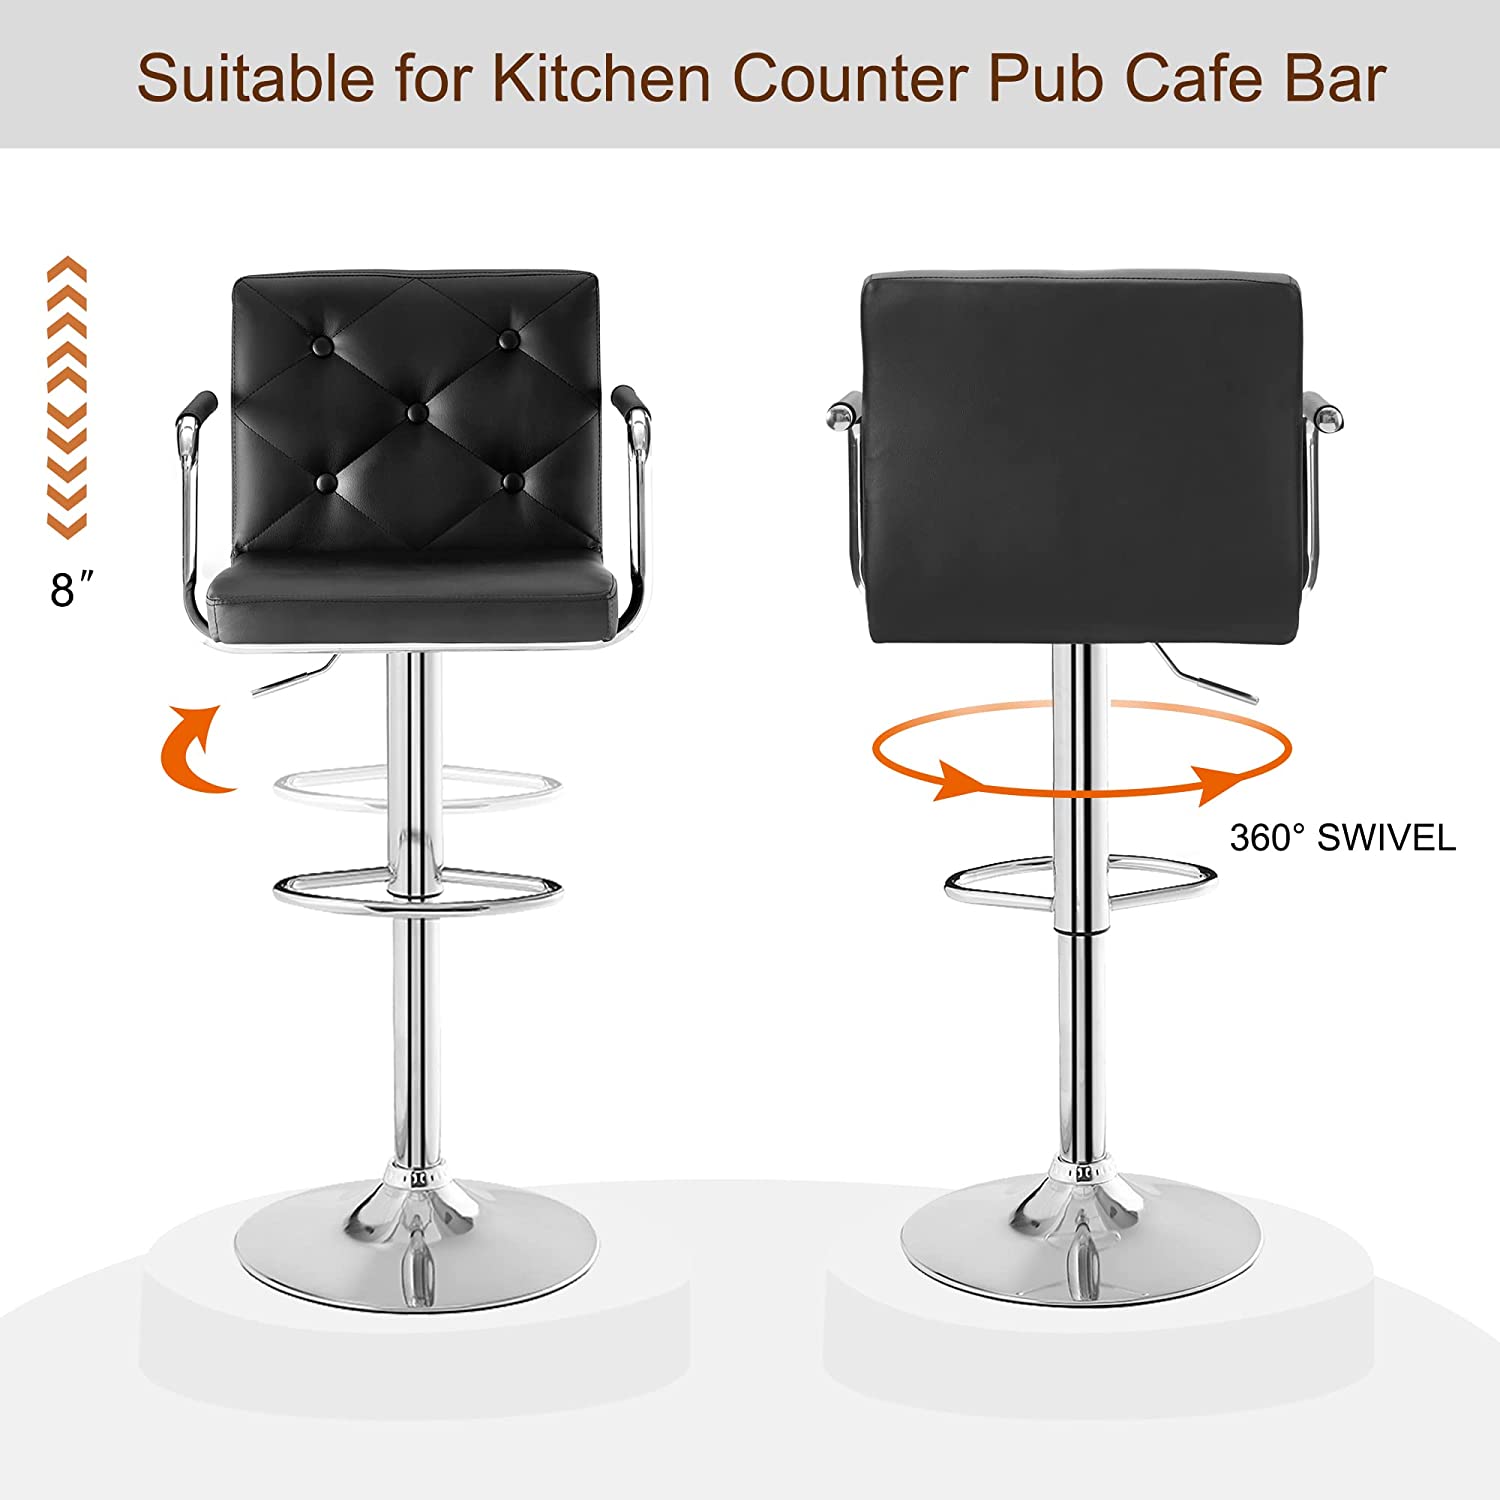 VECELO Adjustable Bar Stools Set of 2, Counter Height Barstool with Back and Arms, Swivel PU Leather Bar Chairs for Kitchen/Island